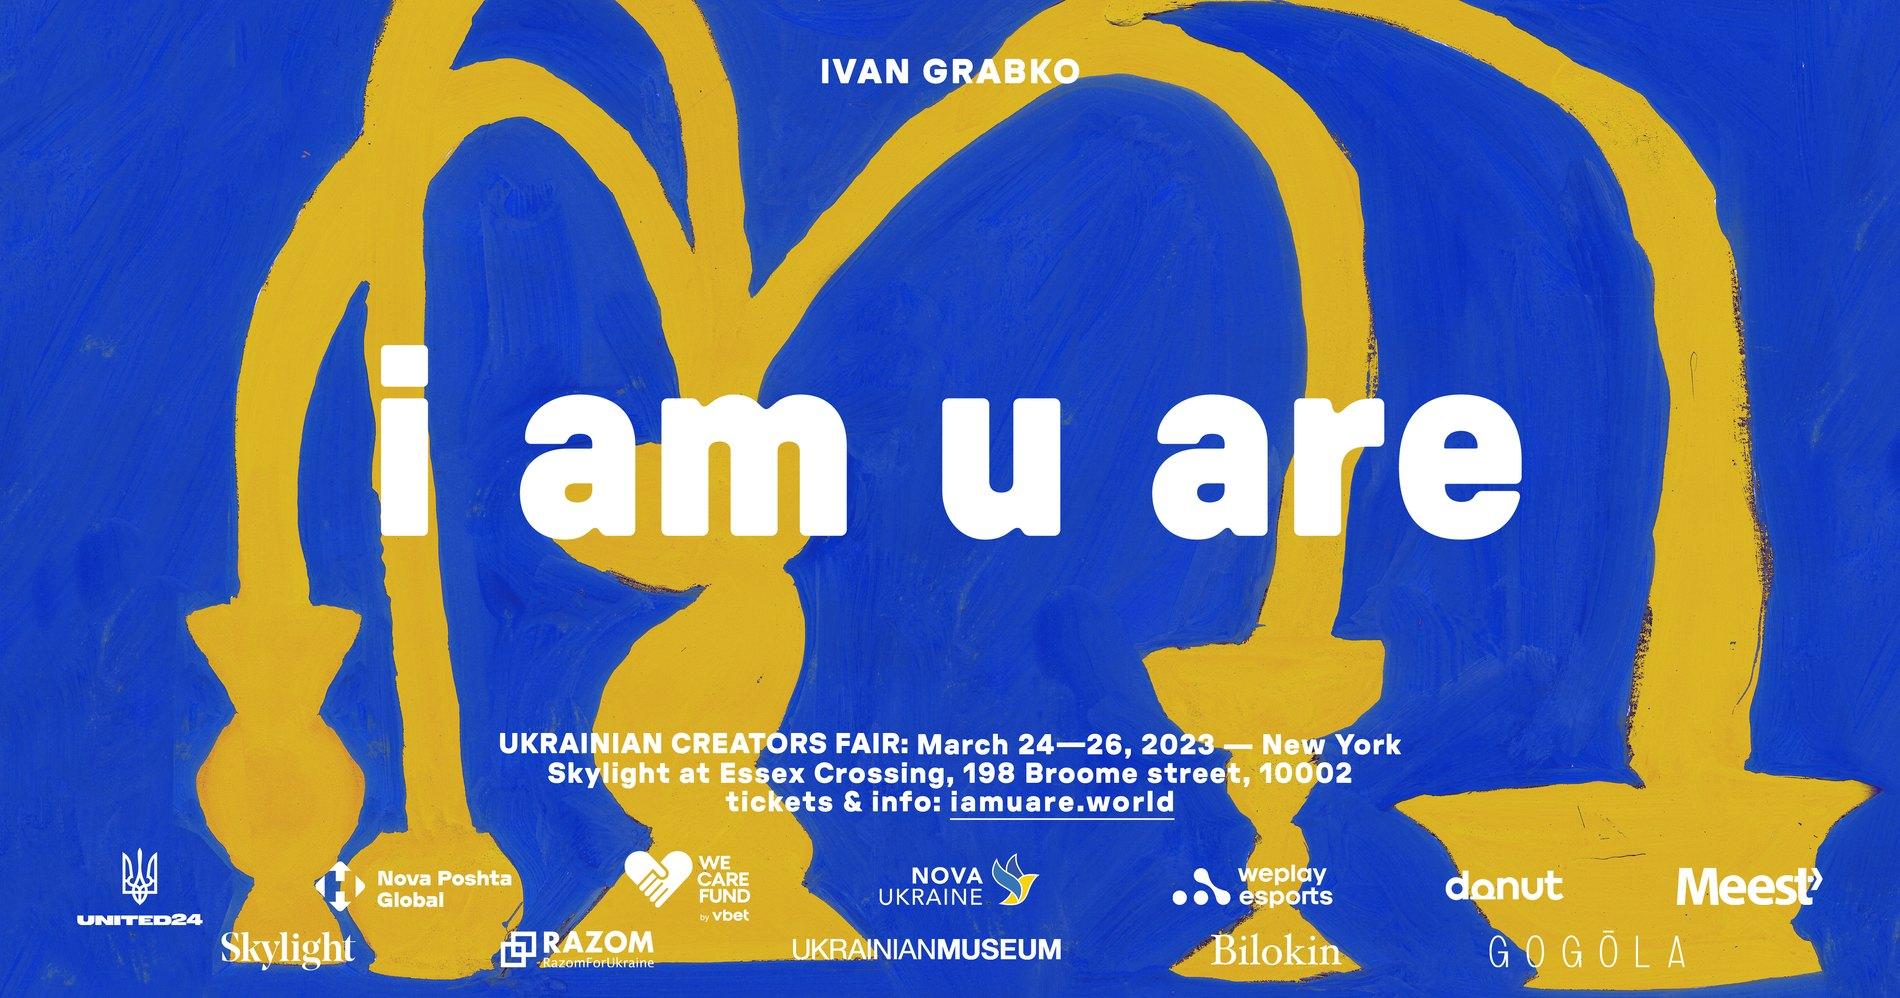 The 3-day I Am U Are exhibition dedicated to the creative economy of Ukraine will be held in New York